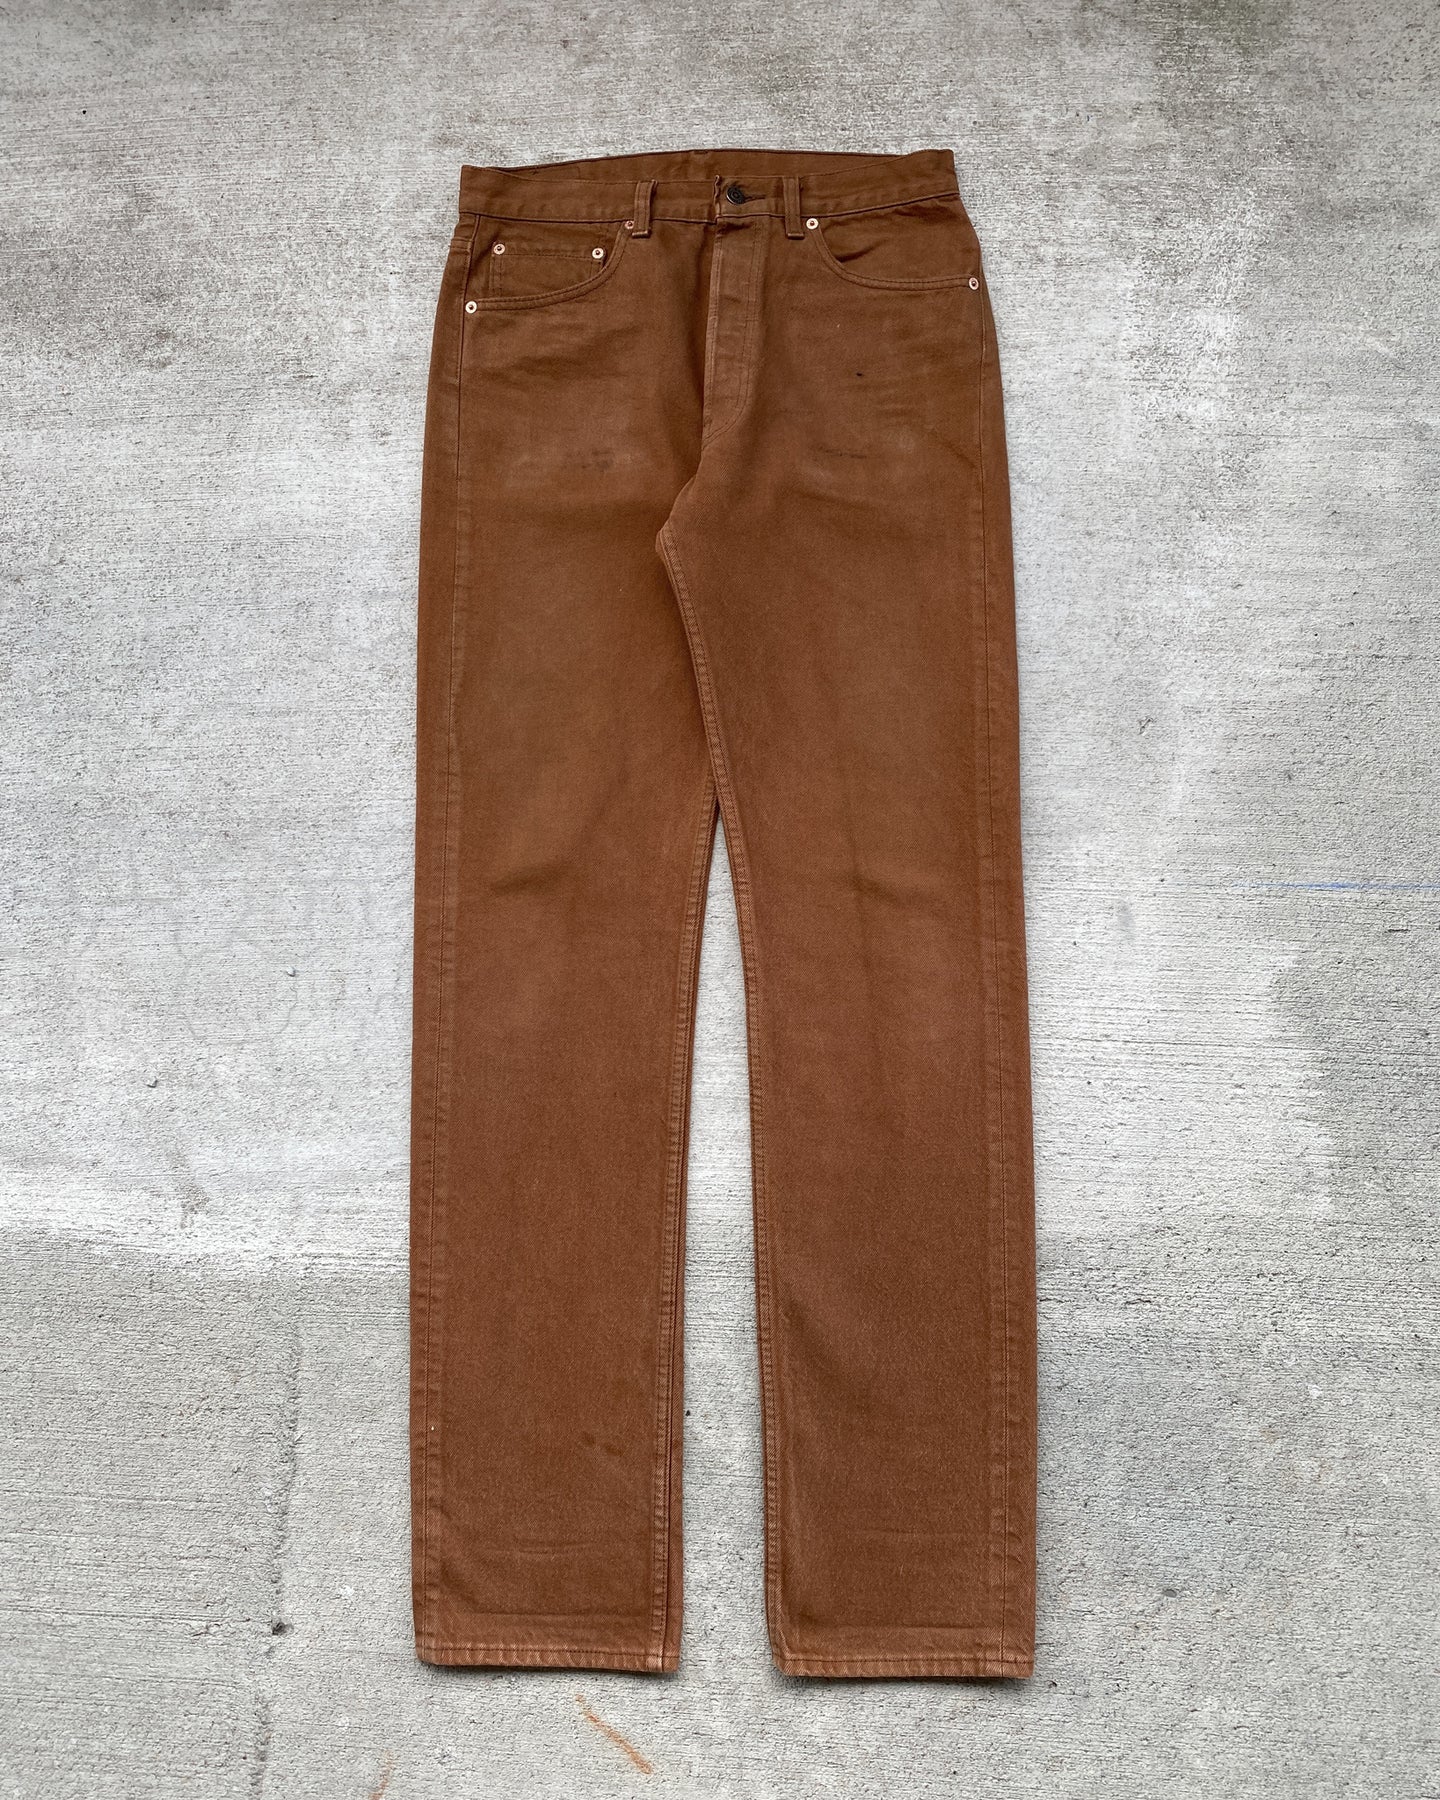 1990s Levi's Clay Brown 501 - Size 32 x 36